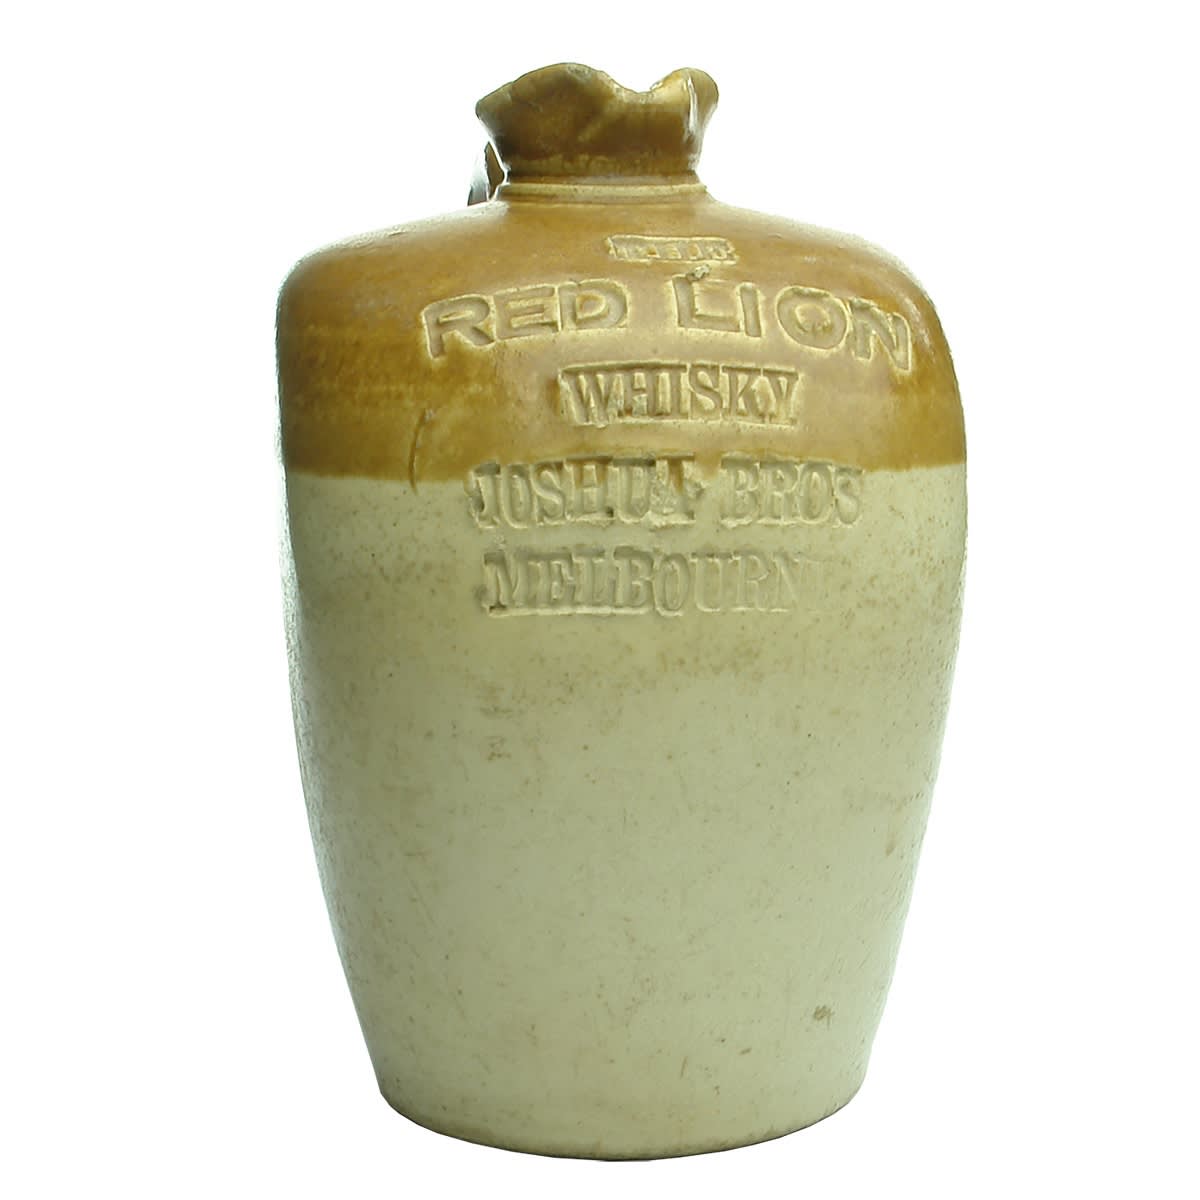 Whisky Jug. The Red Lion Whisky. Joshua Bros., Melbourne. (Victoria)